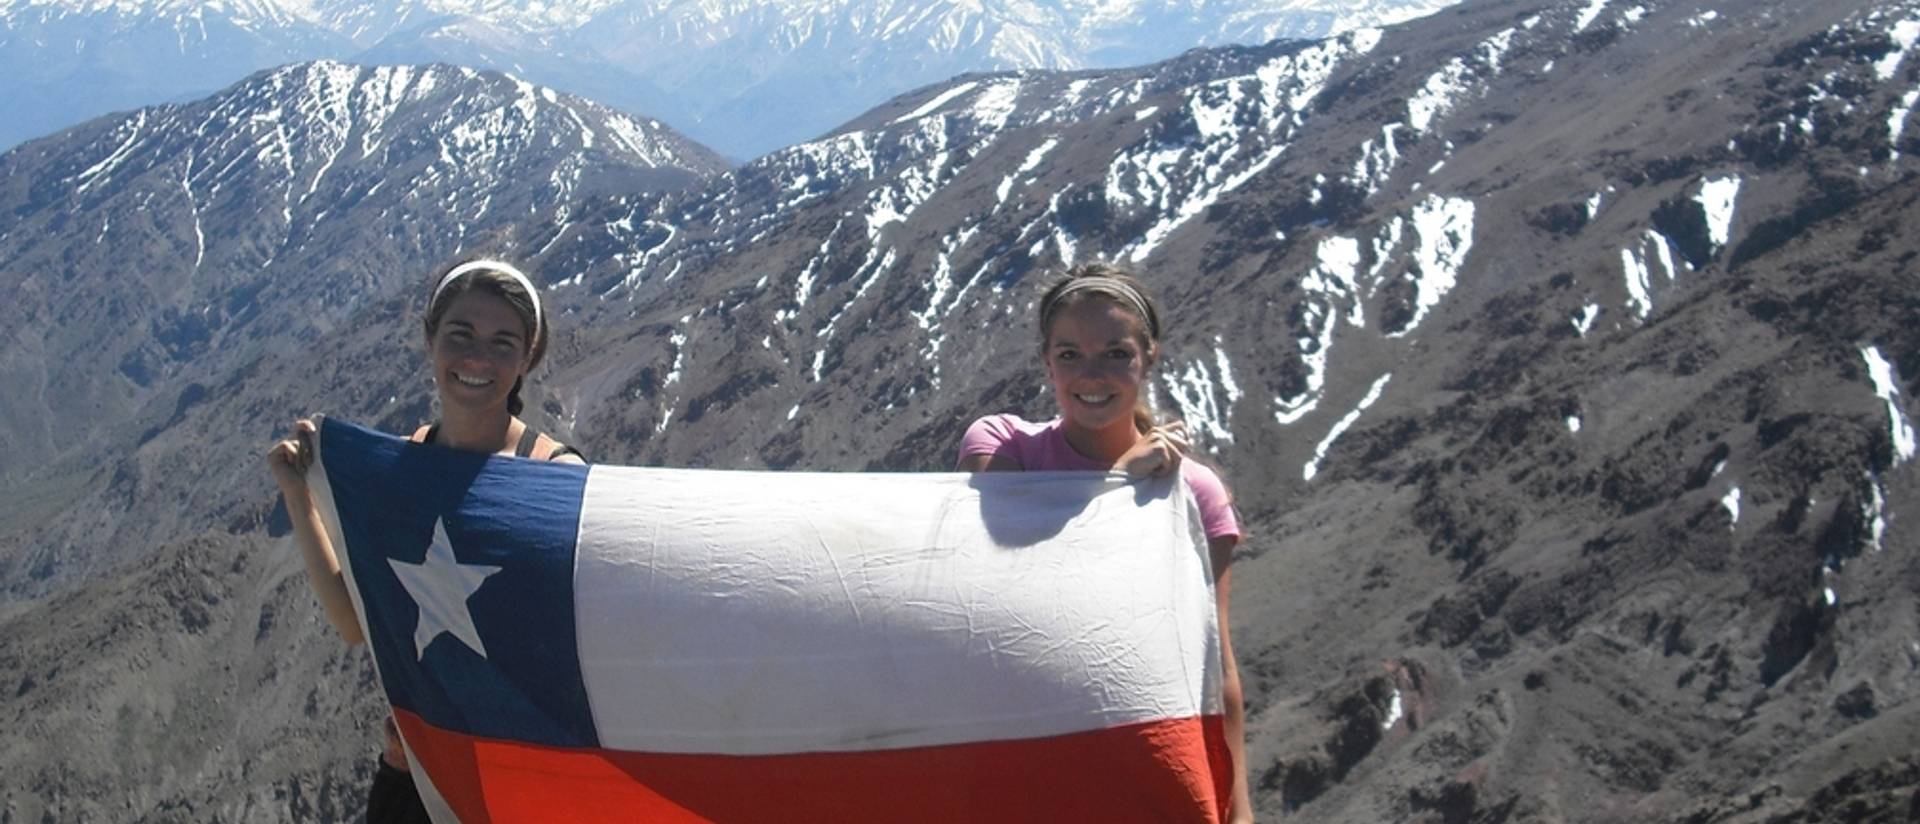 Two people smile while holding Chile's flag with mountains in the background.